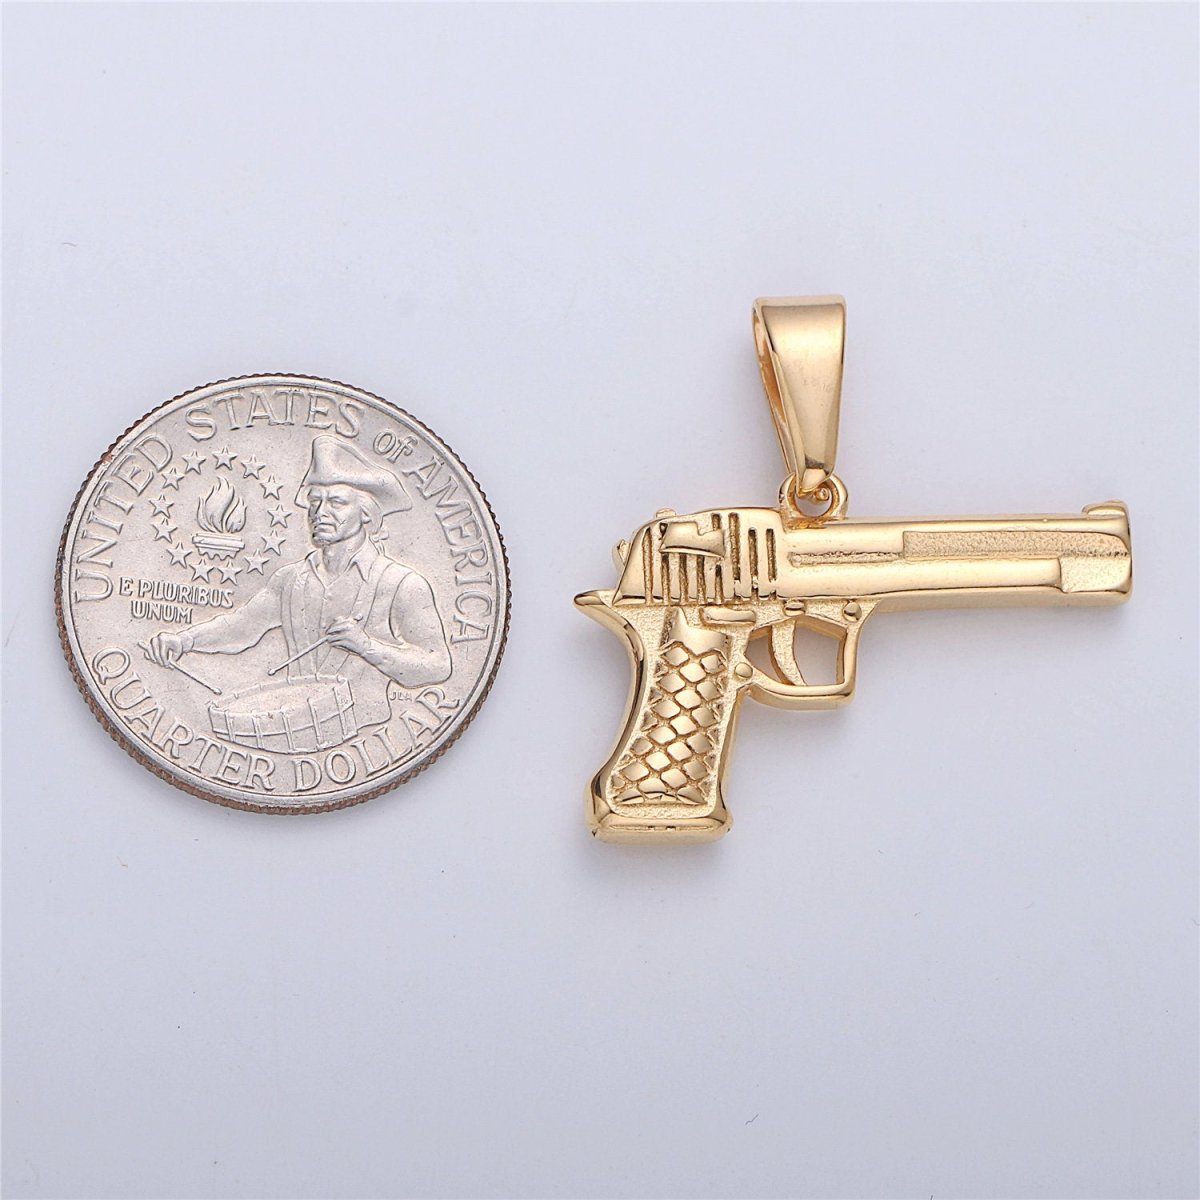 Gold Filled Pistol Charm Silver Gun Pendant for Earring Necklace Jewelry Making Supplies 30mmx30mm J-673 - DLUXCA